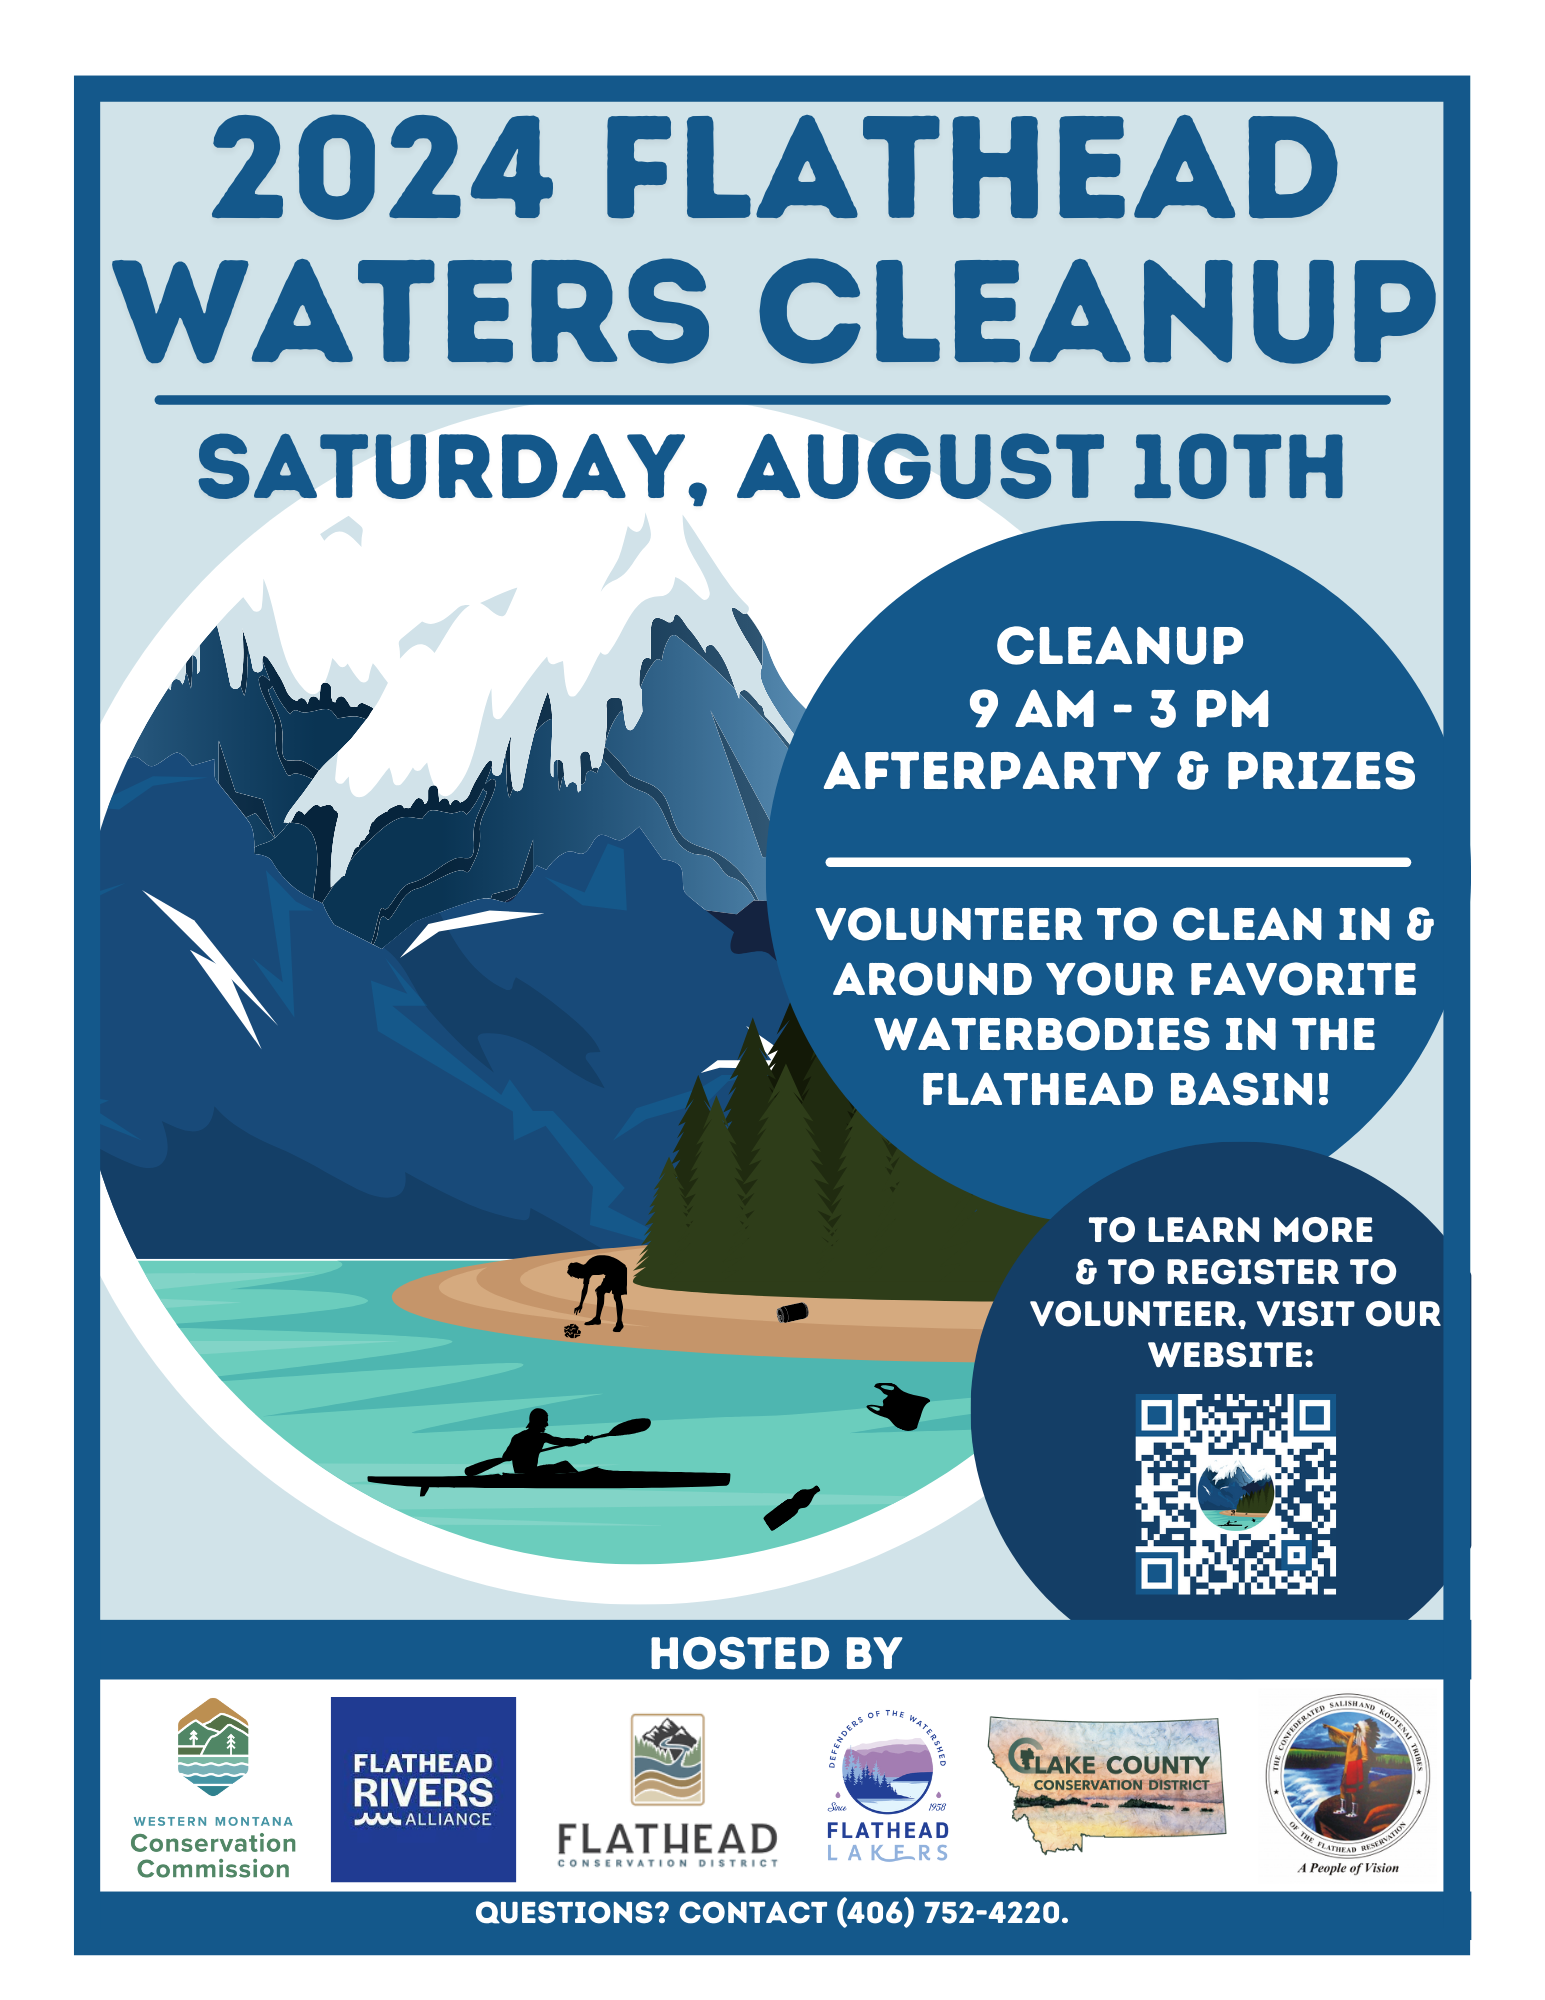 Flathead Lakers Cleanup Poster for August 10th